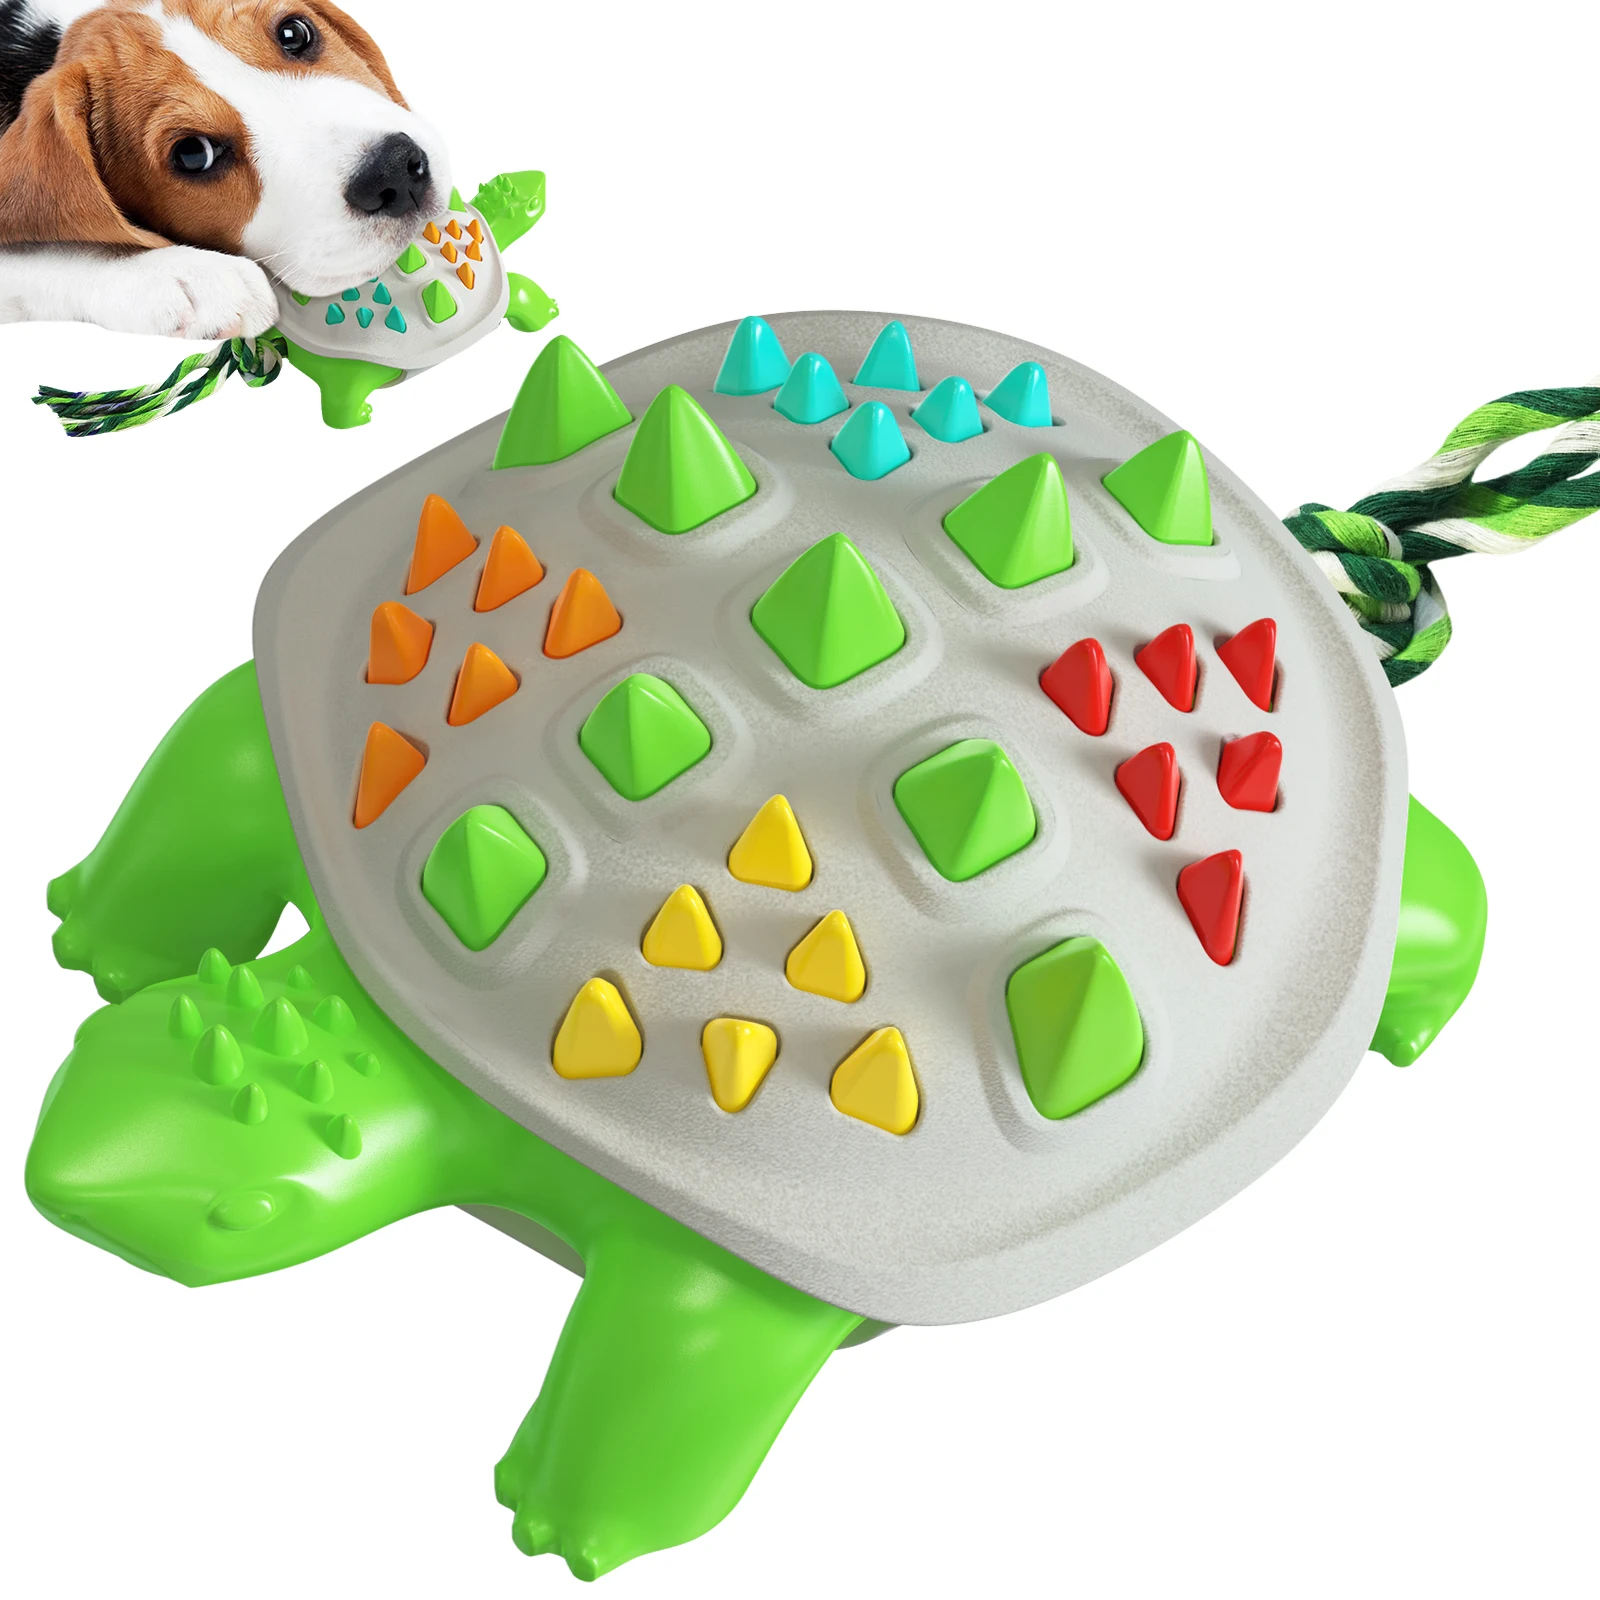 

Pet dog toy colorful turtle / dog bite-resistant and molar interactive products Factory wholesale price supports customization, Gray yellow, gray green